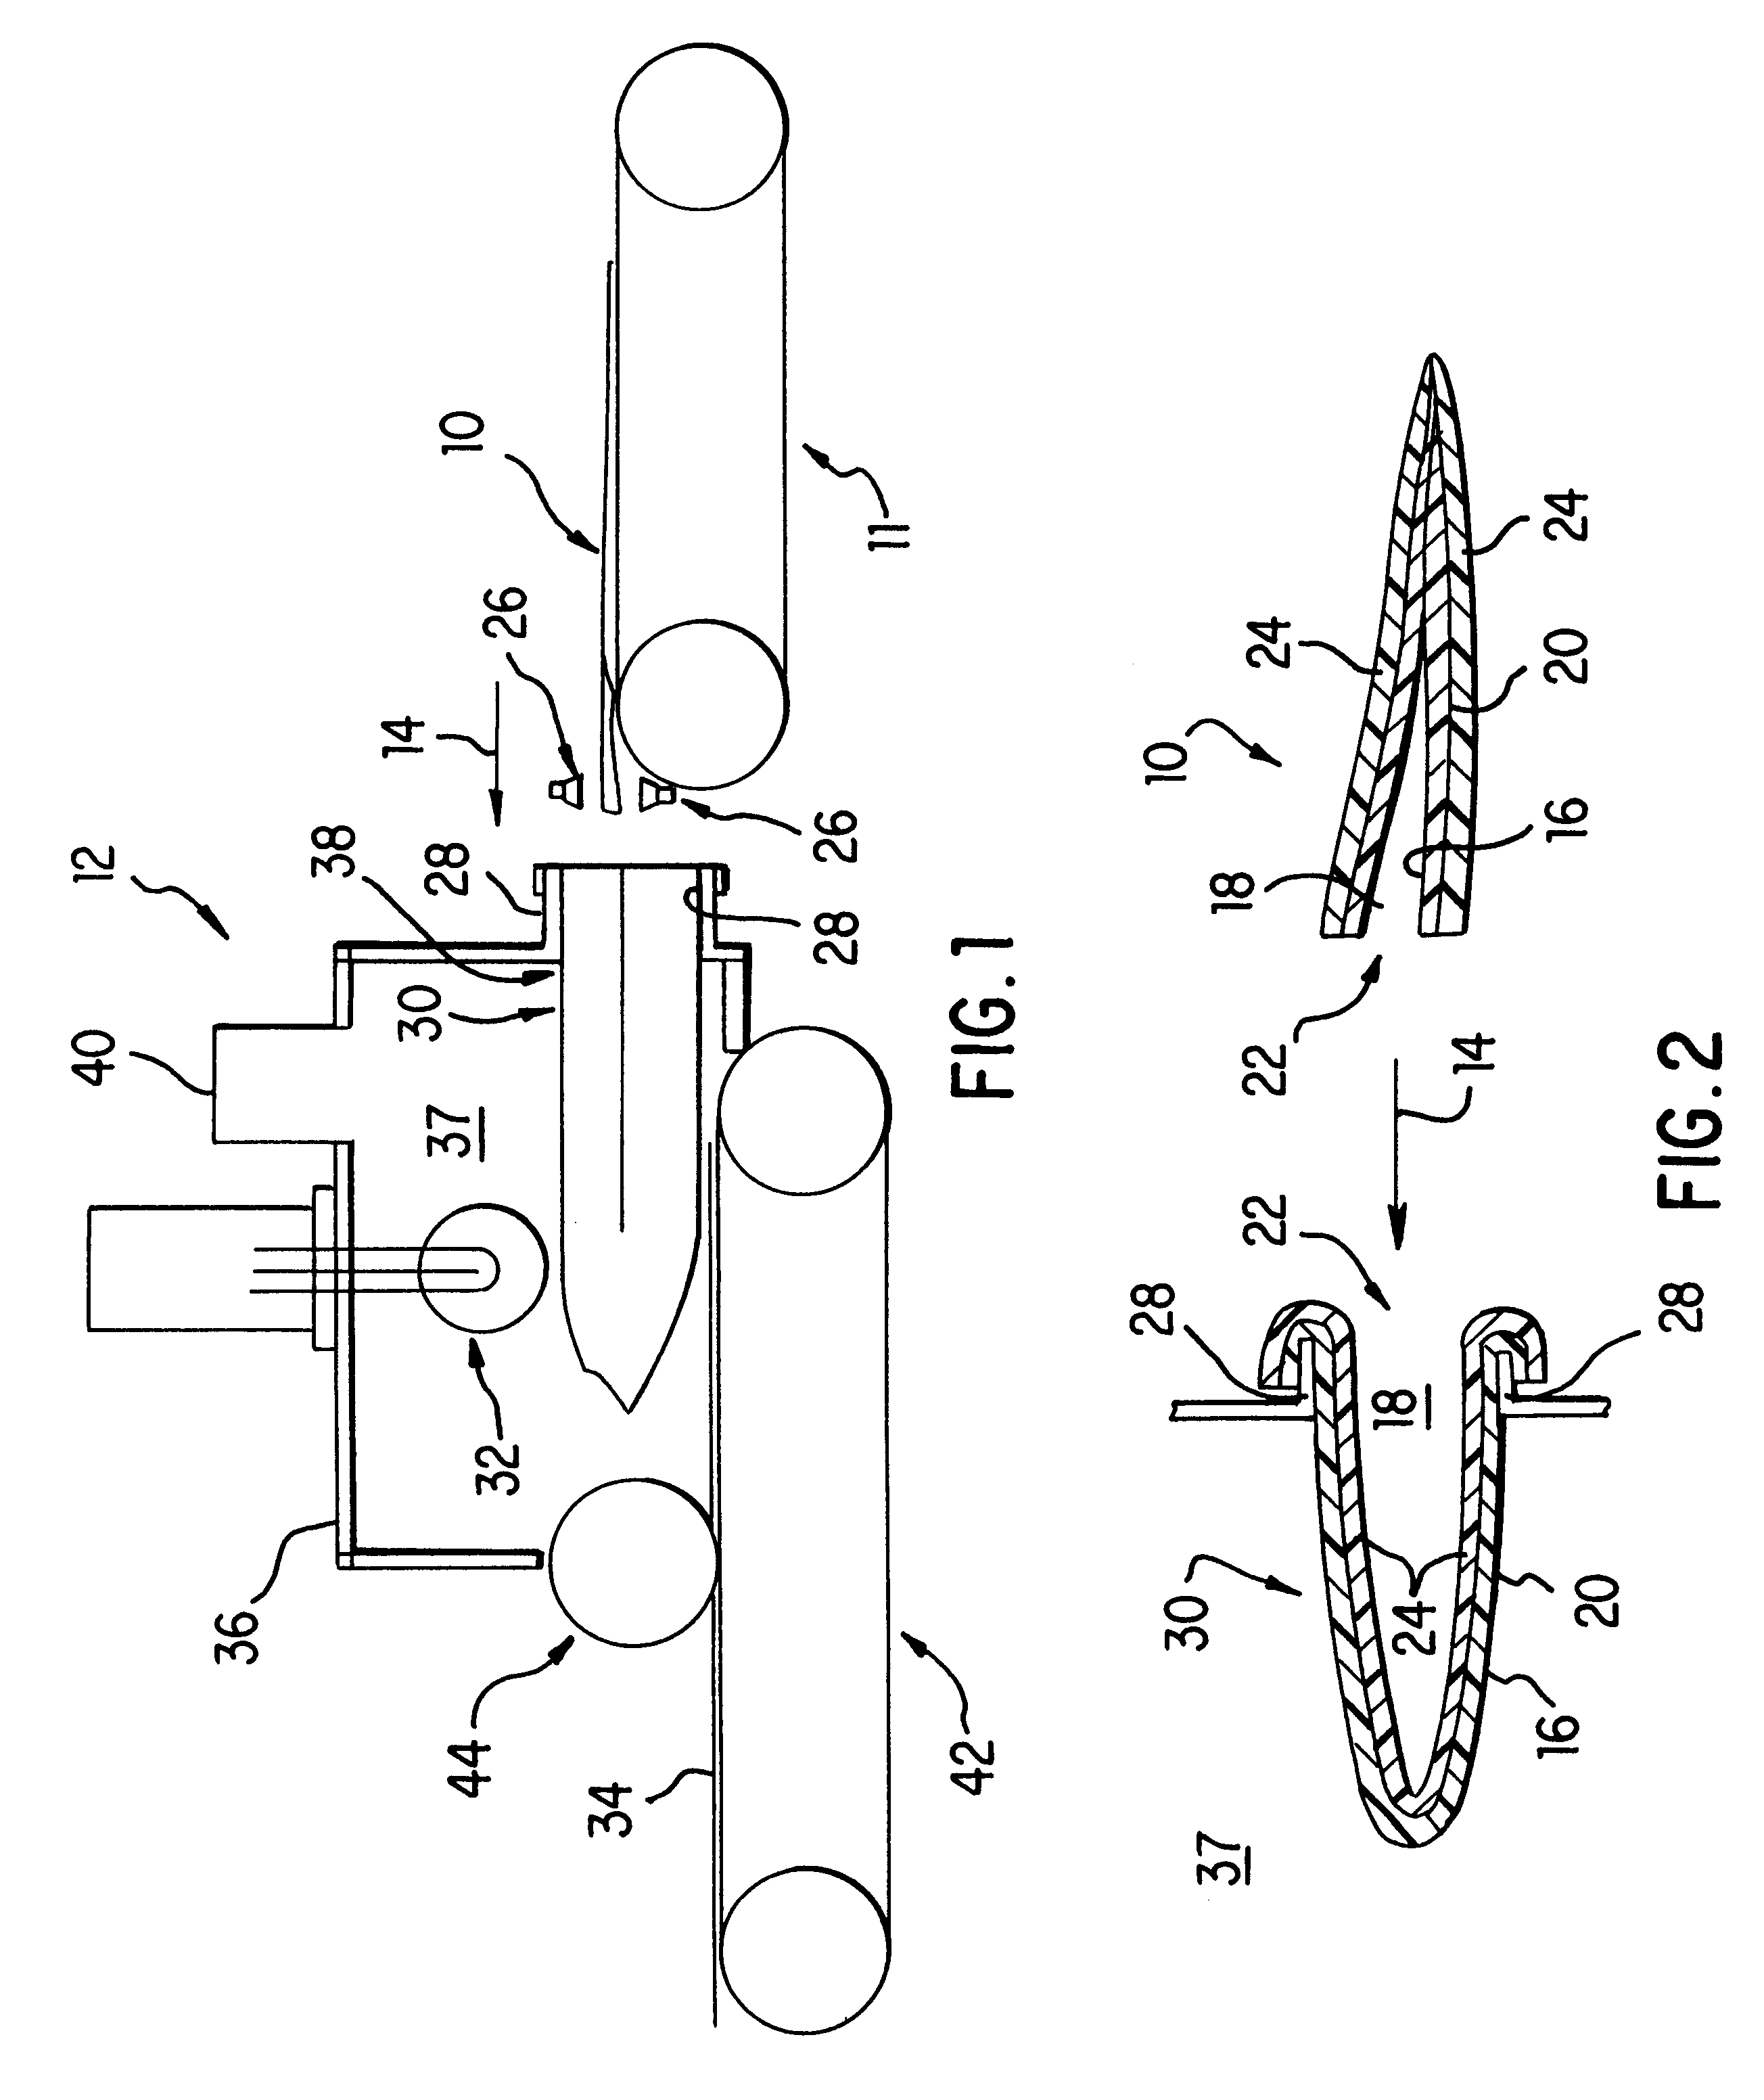 Method for imparting a food additive and package for same